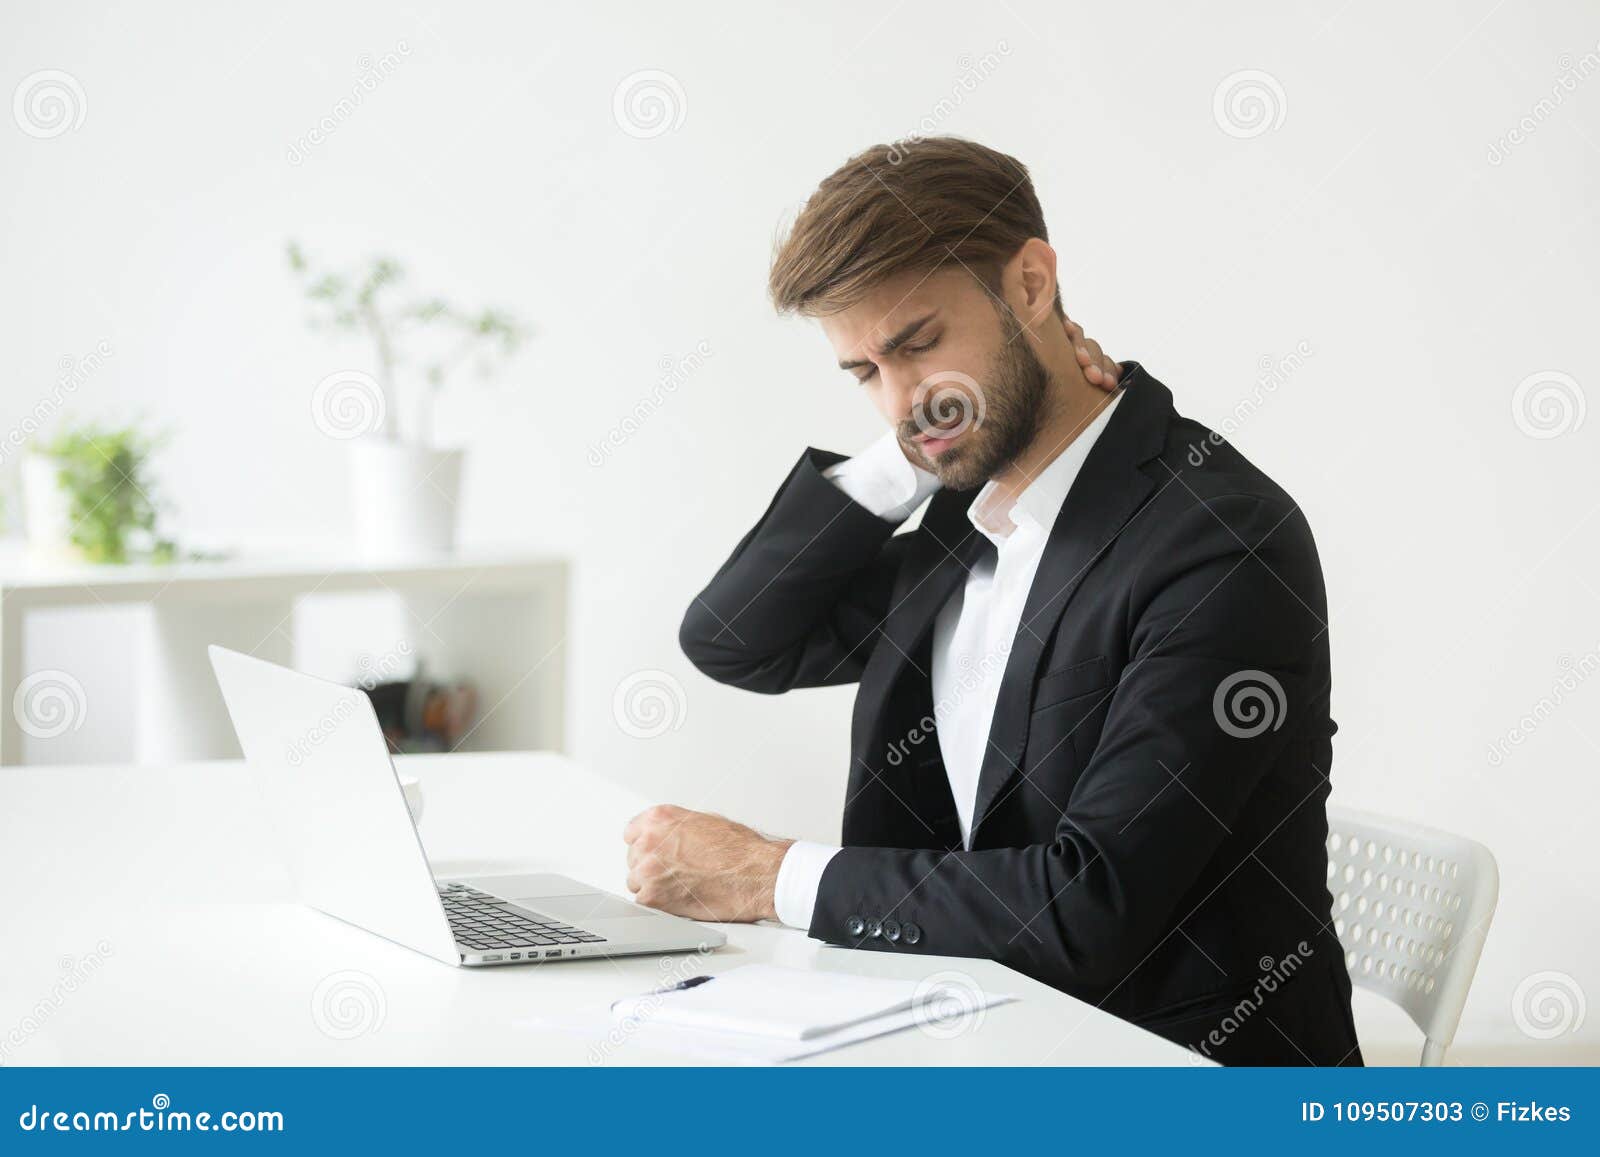 young businessman in suit feeling neck pain after sedentary work